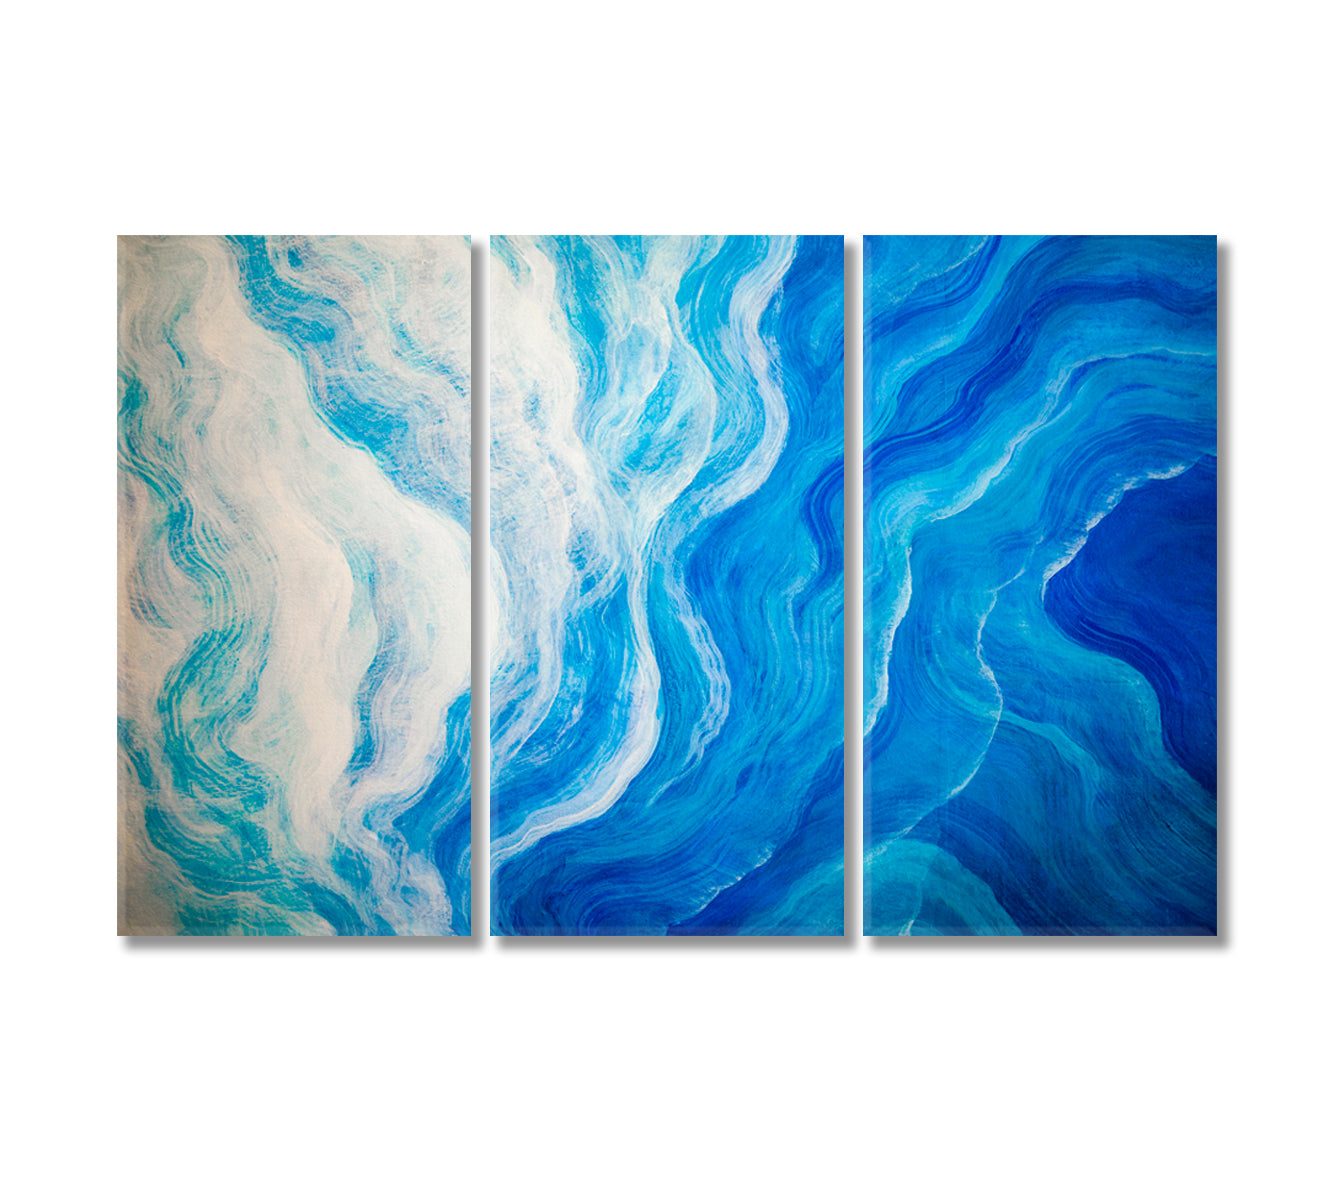 White and Blue Wave Lines Canvas Print-Canvas Print-CetArt-3 Panels-36x24 inches-CetArt